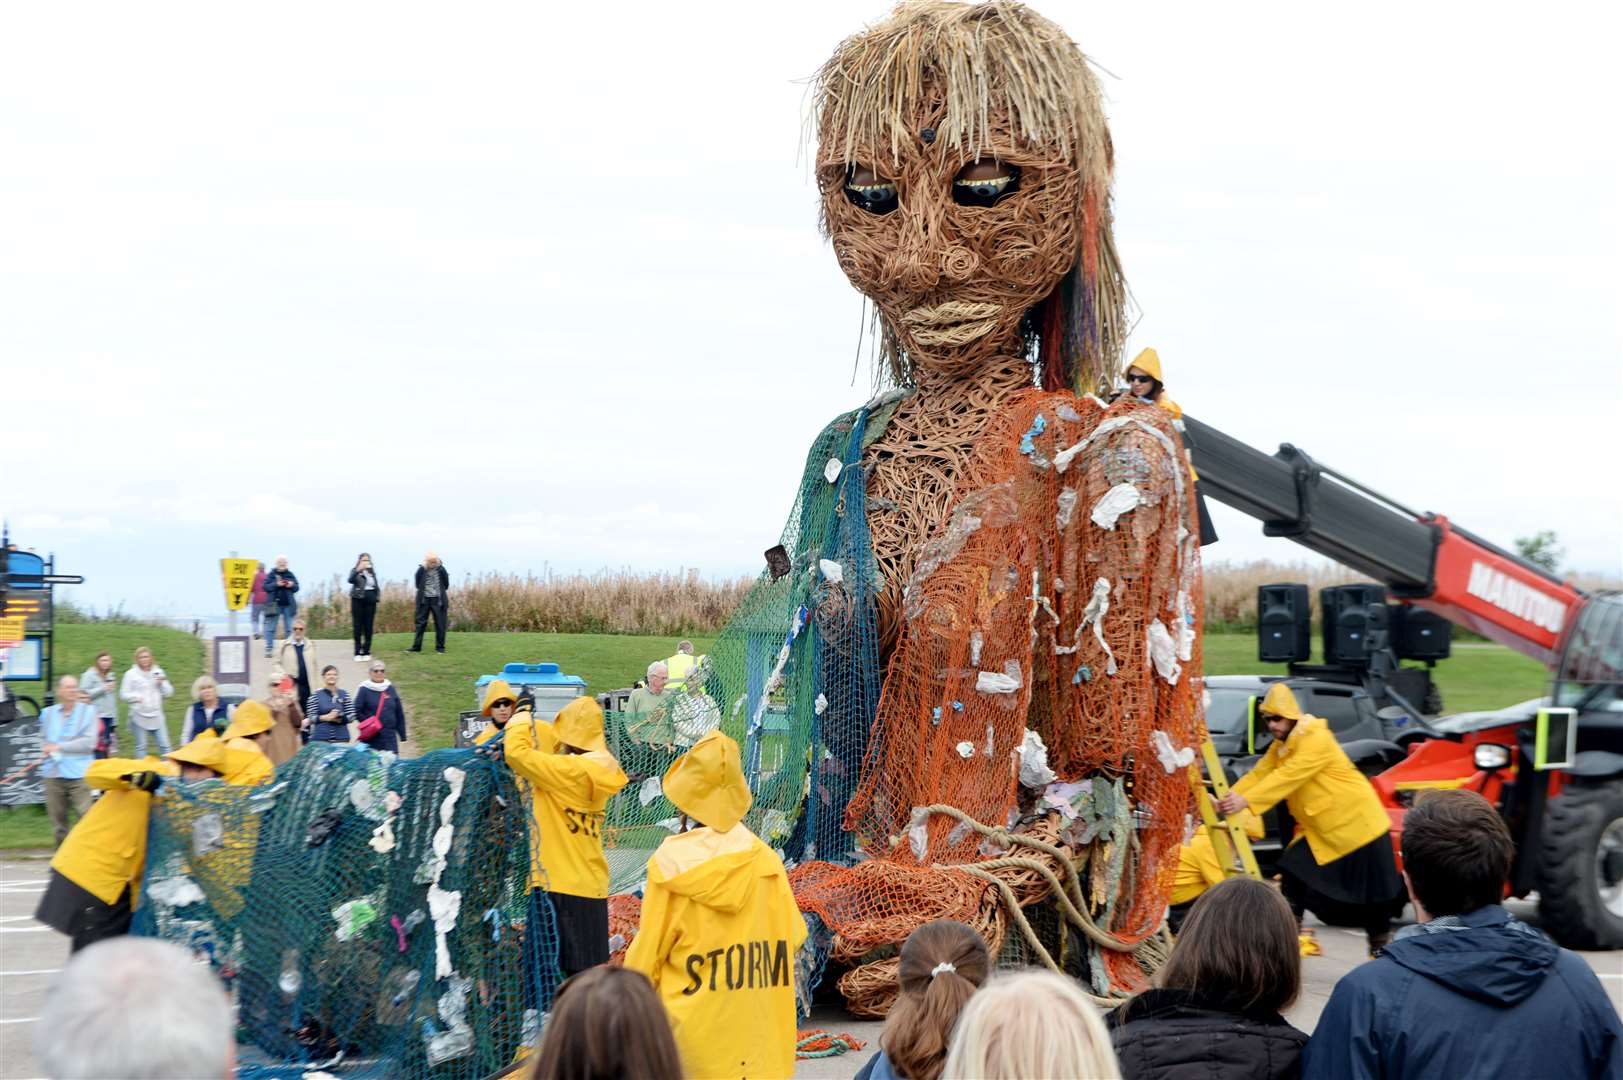 Storm the Giant visits Nairn 12 September 2021: Storm the giant sat down.Picture: James Mackenzie.